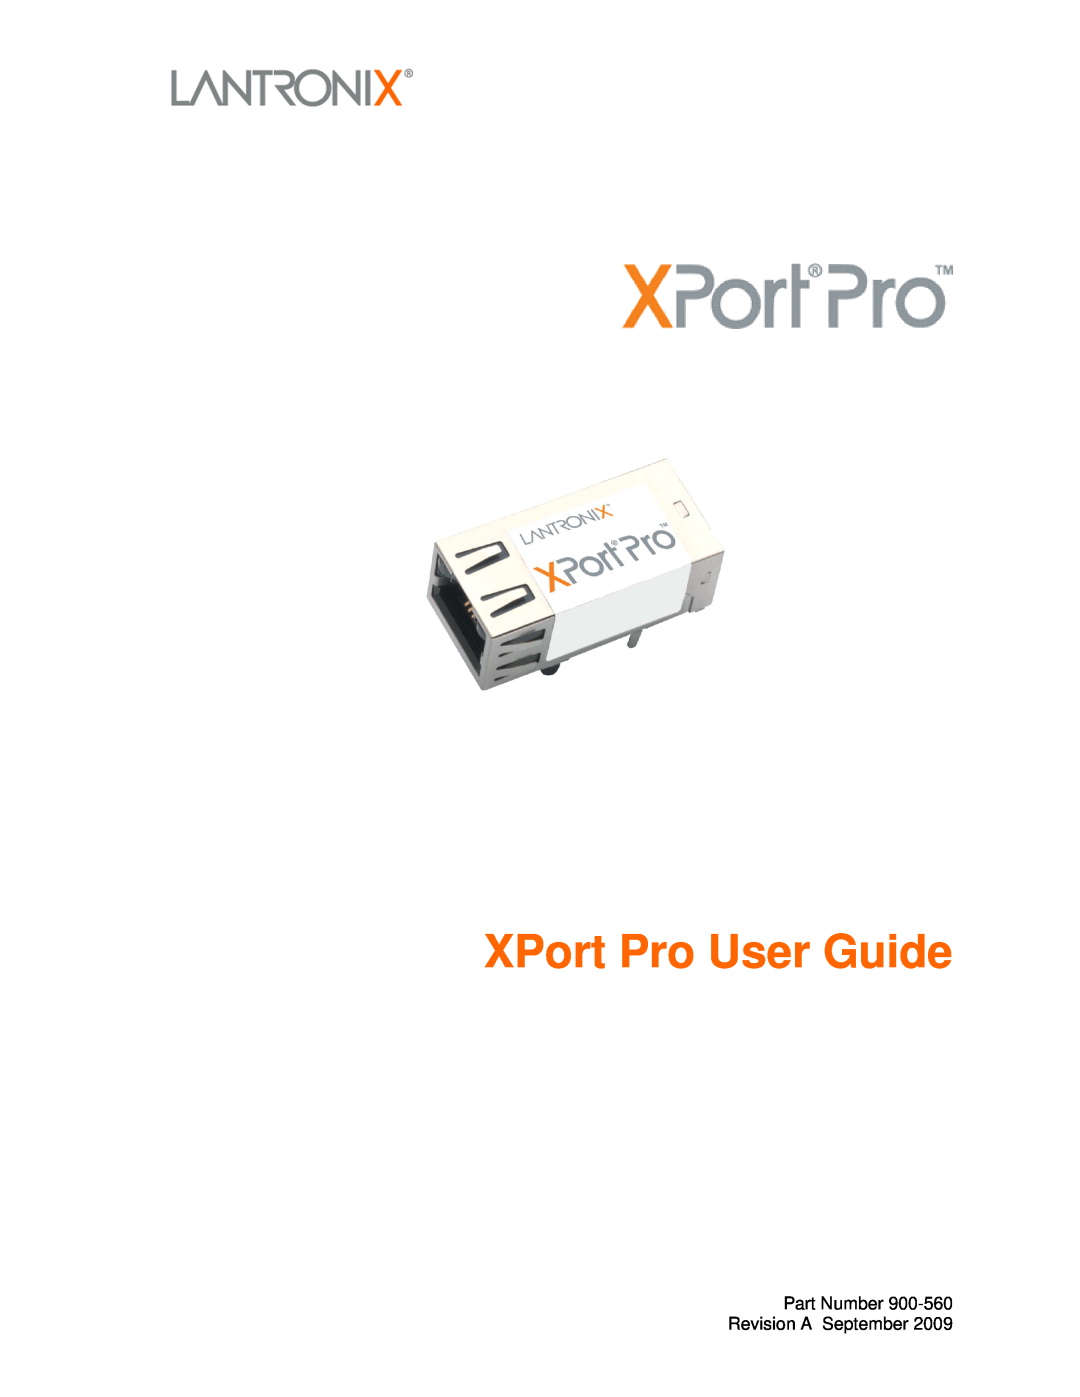 Lantronix 900-560 manual XPort Pro User Guide, Part Number Revision A September 